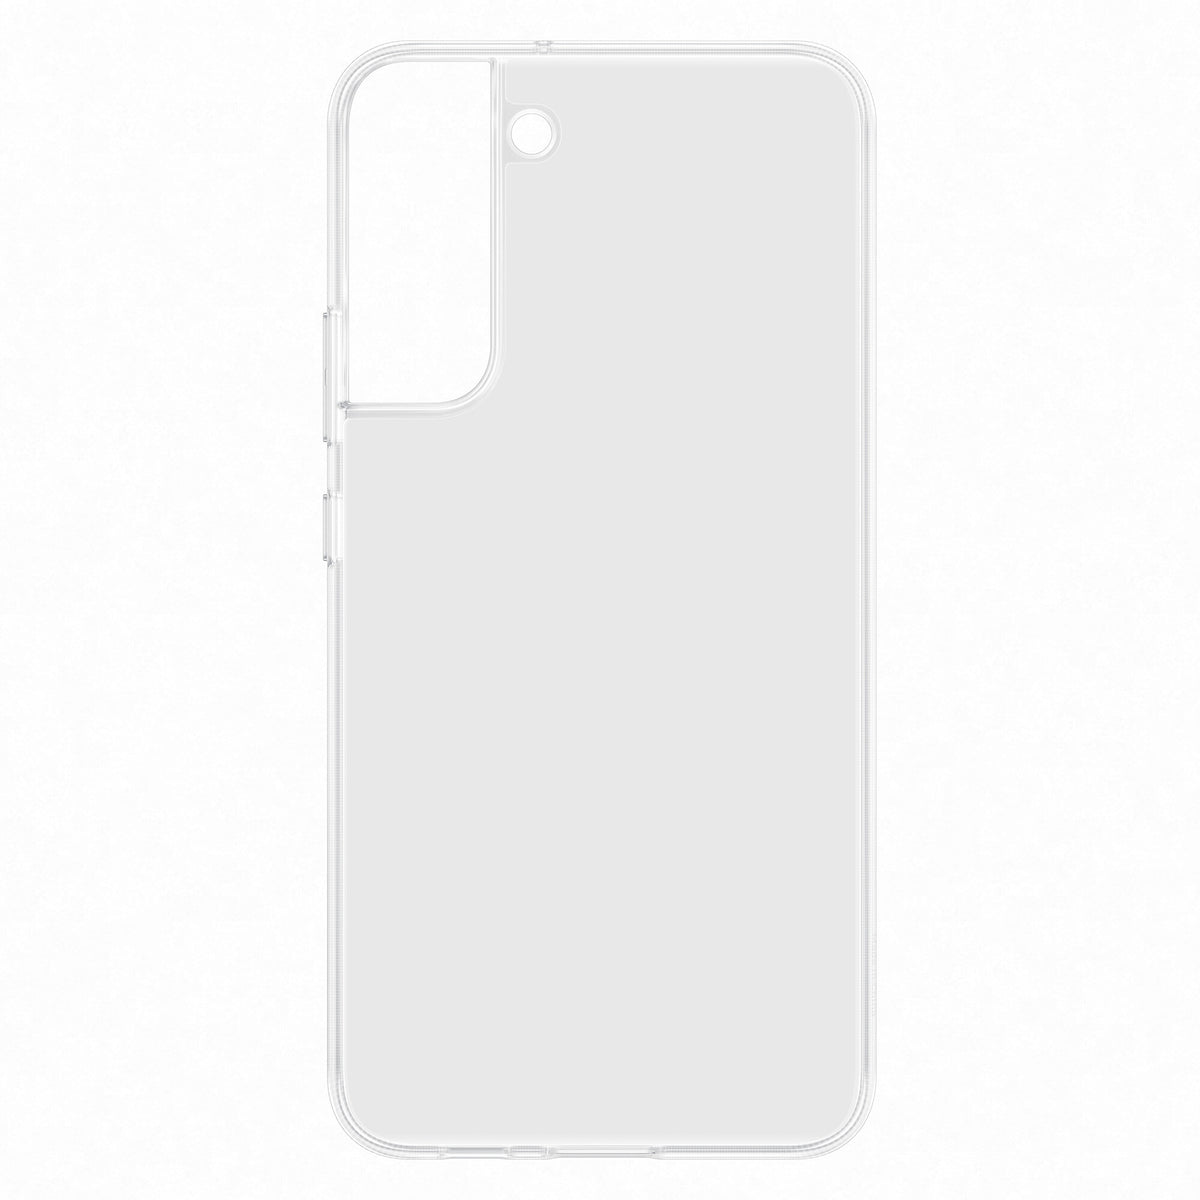 Samsung mobile phone case for Galaxy S22+ in Transparent